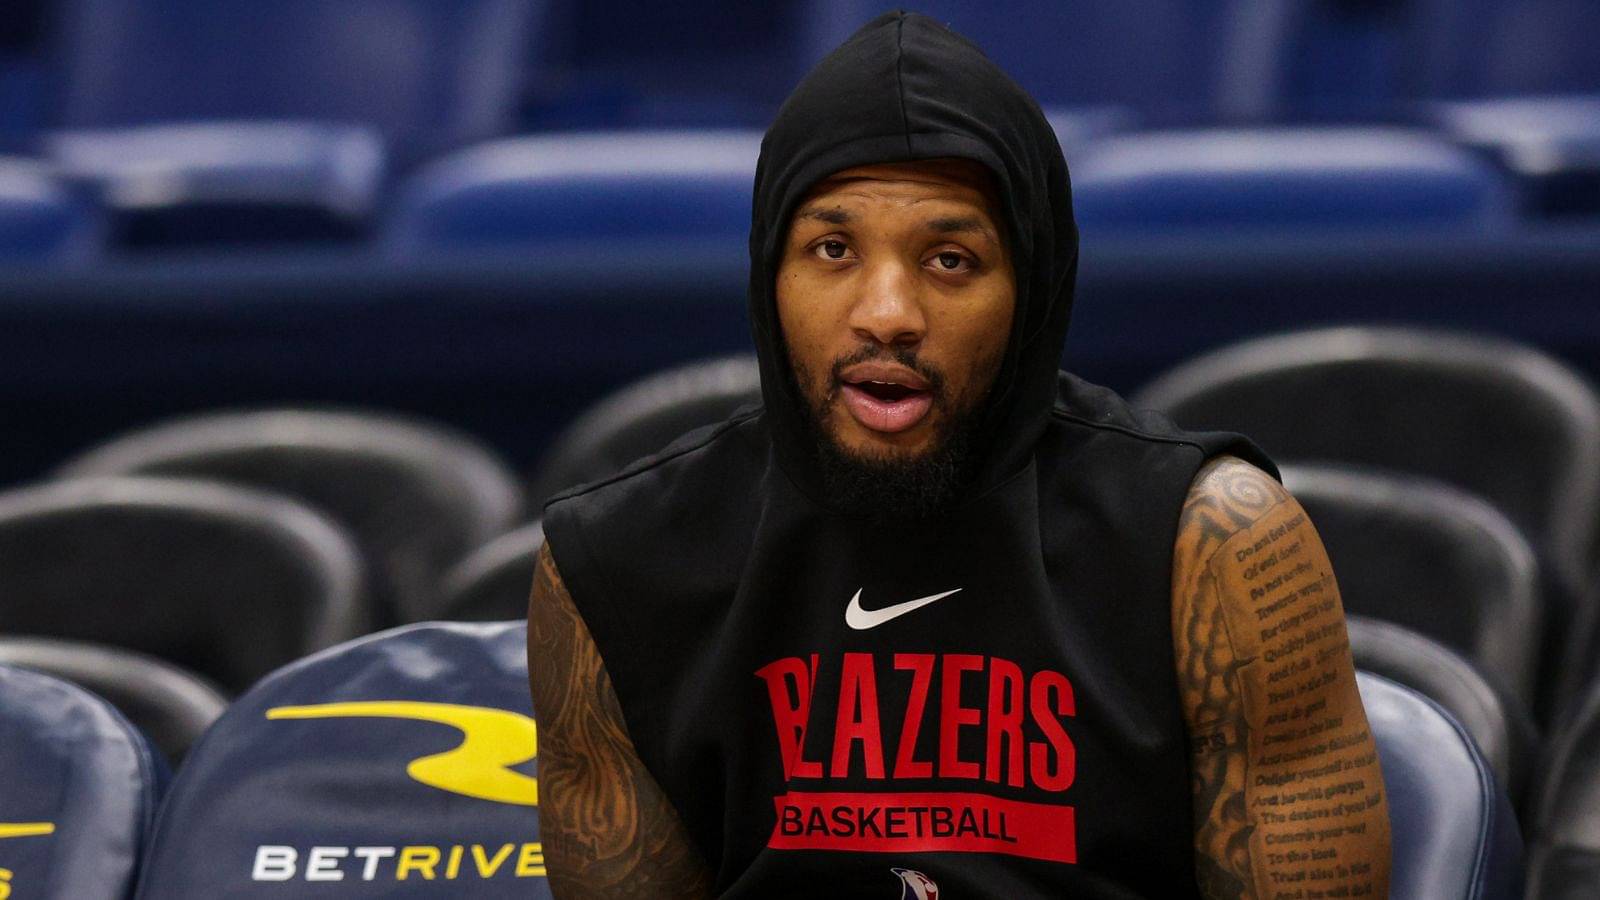 “Guess Who Couldn’t Care Less?”: $100M Worth Damian Lillard Mercilessly Trolls Fan Who Kept Him in His Fantasy Team